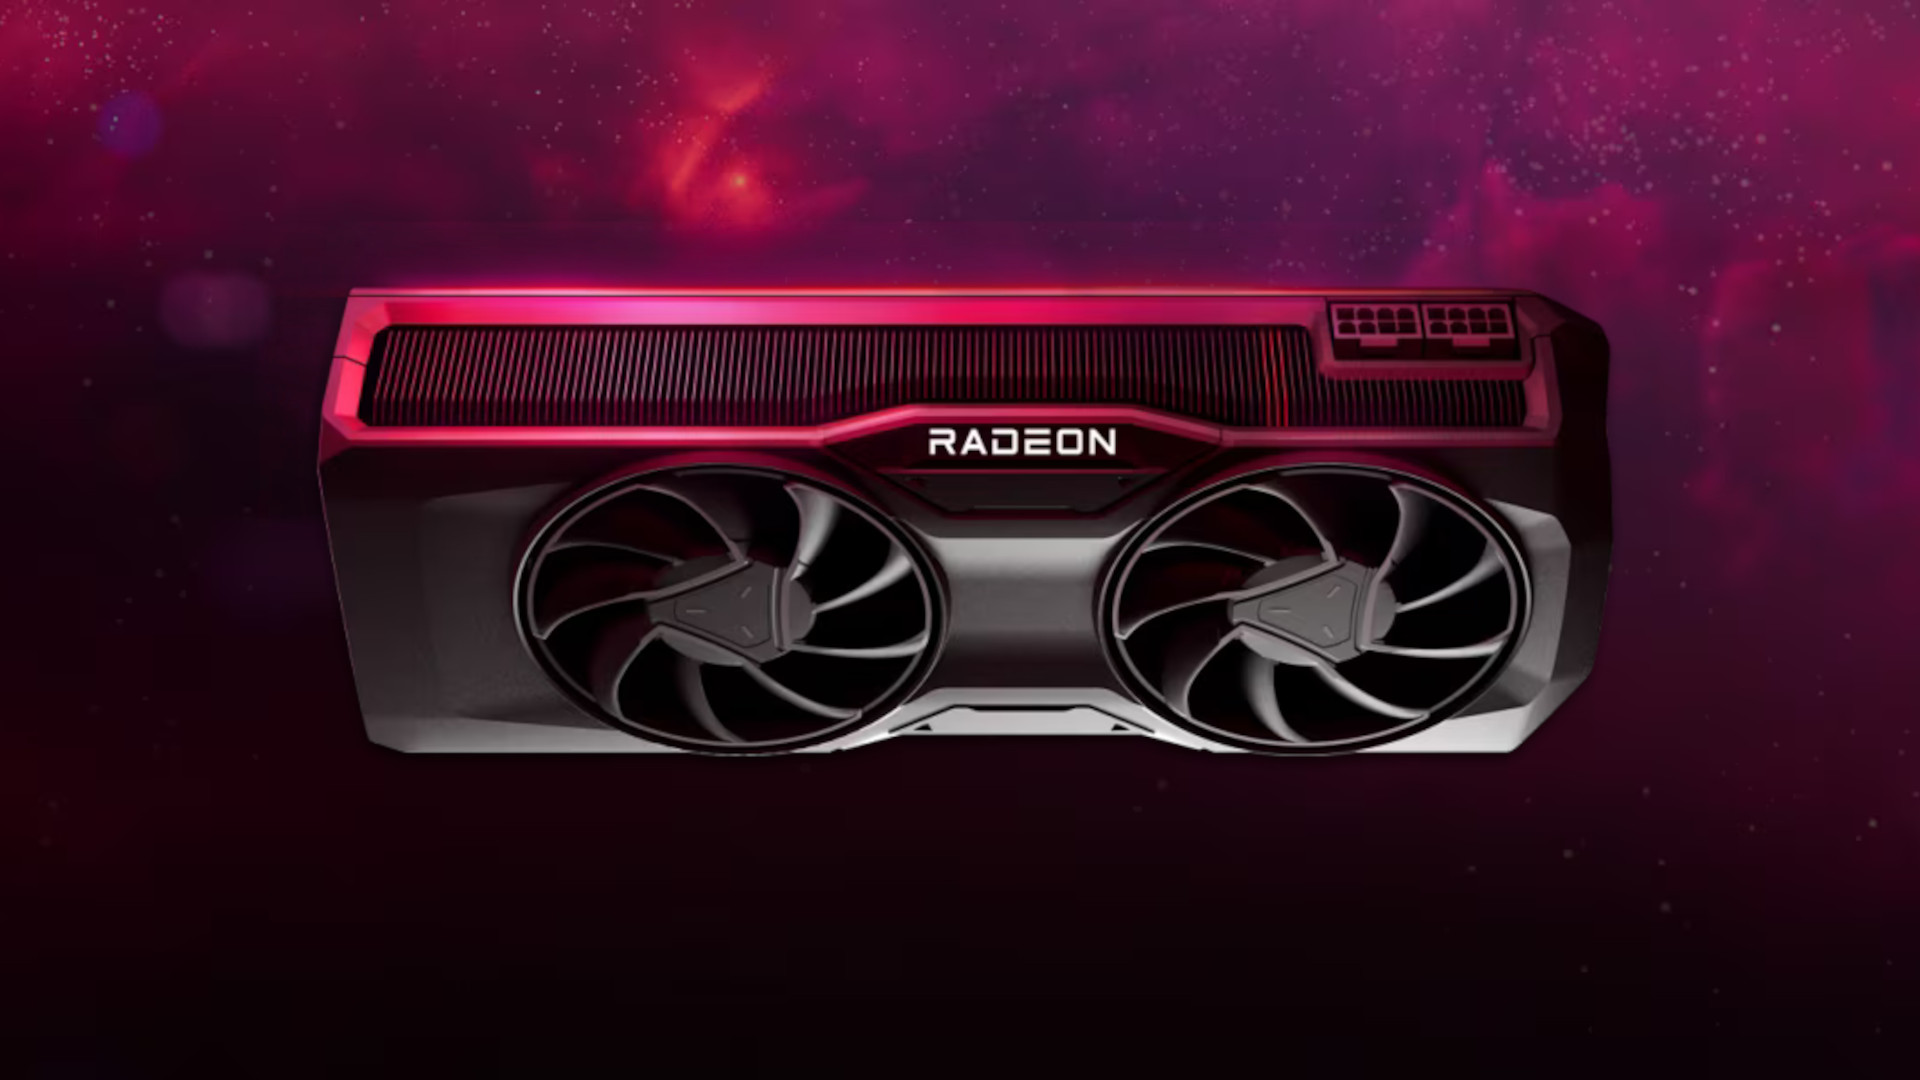 AMD Radeon RX 7800 XT specs: A Radeon reference graphics card floats against a dark red nebula background